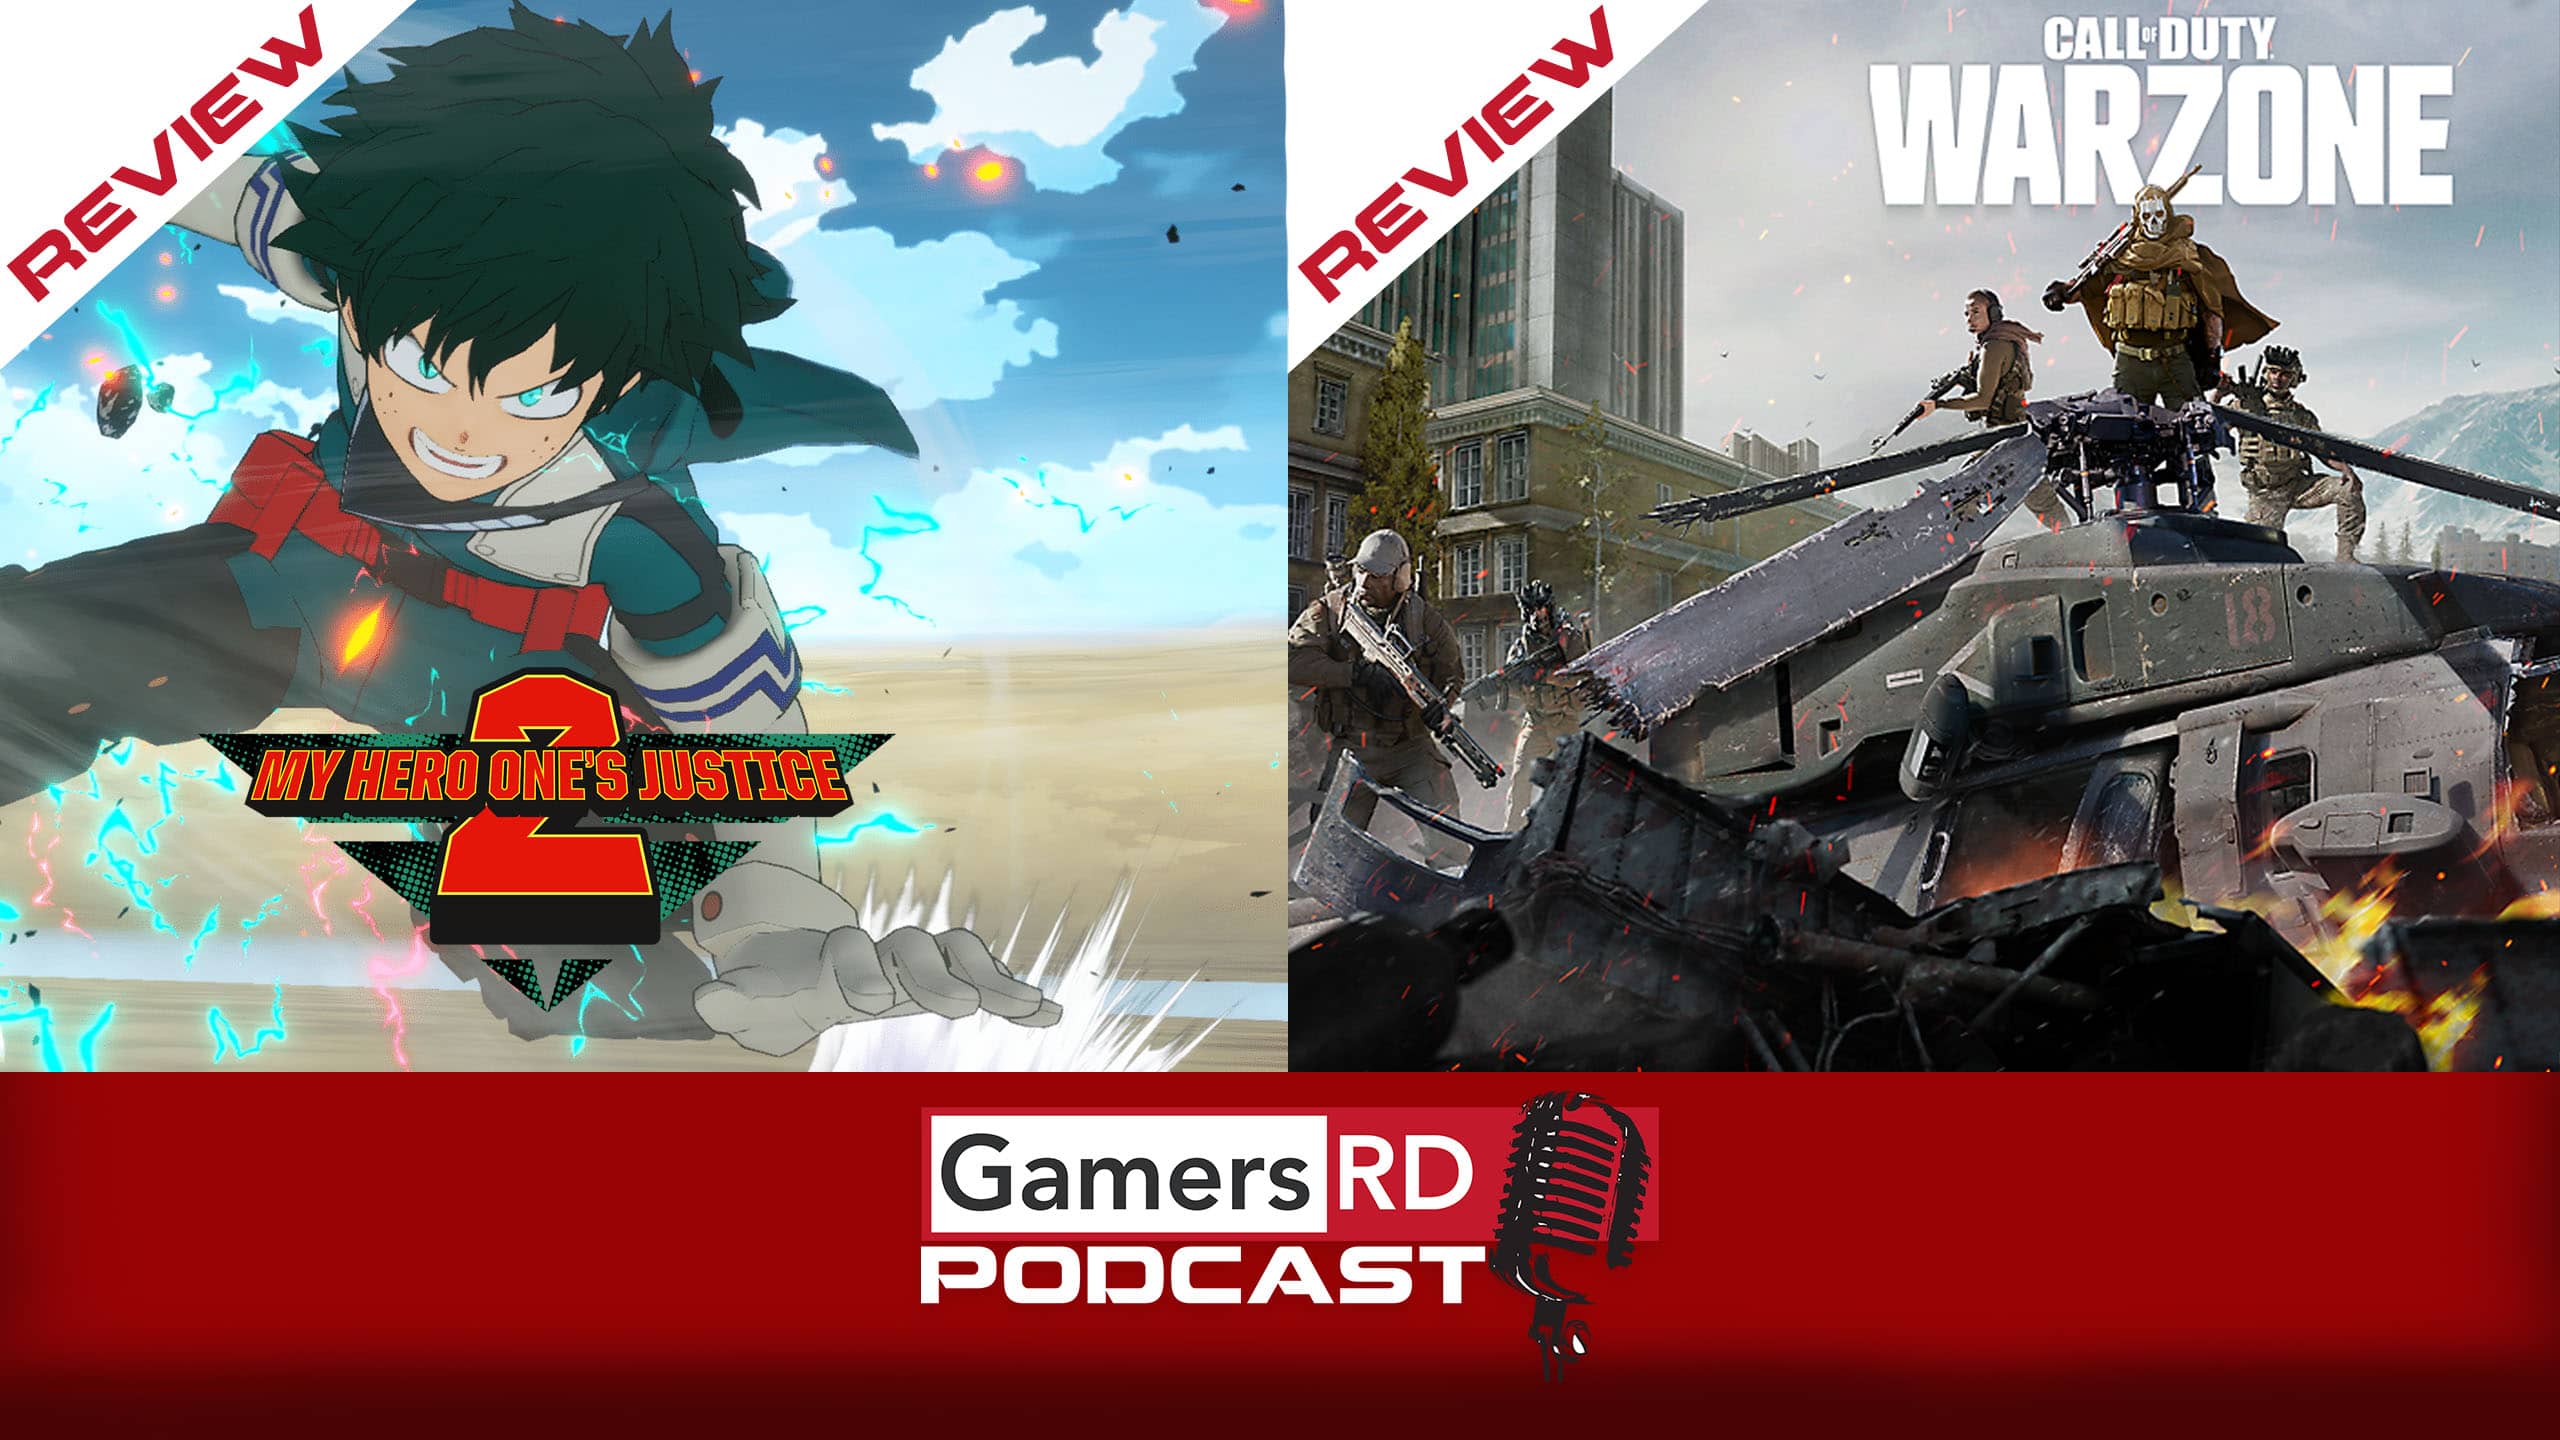 GamersRD Podcast #112: My Hero One’s Justice 2 Review y Call of Duty: Warzone